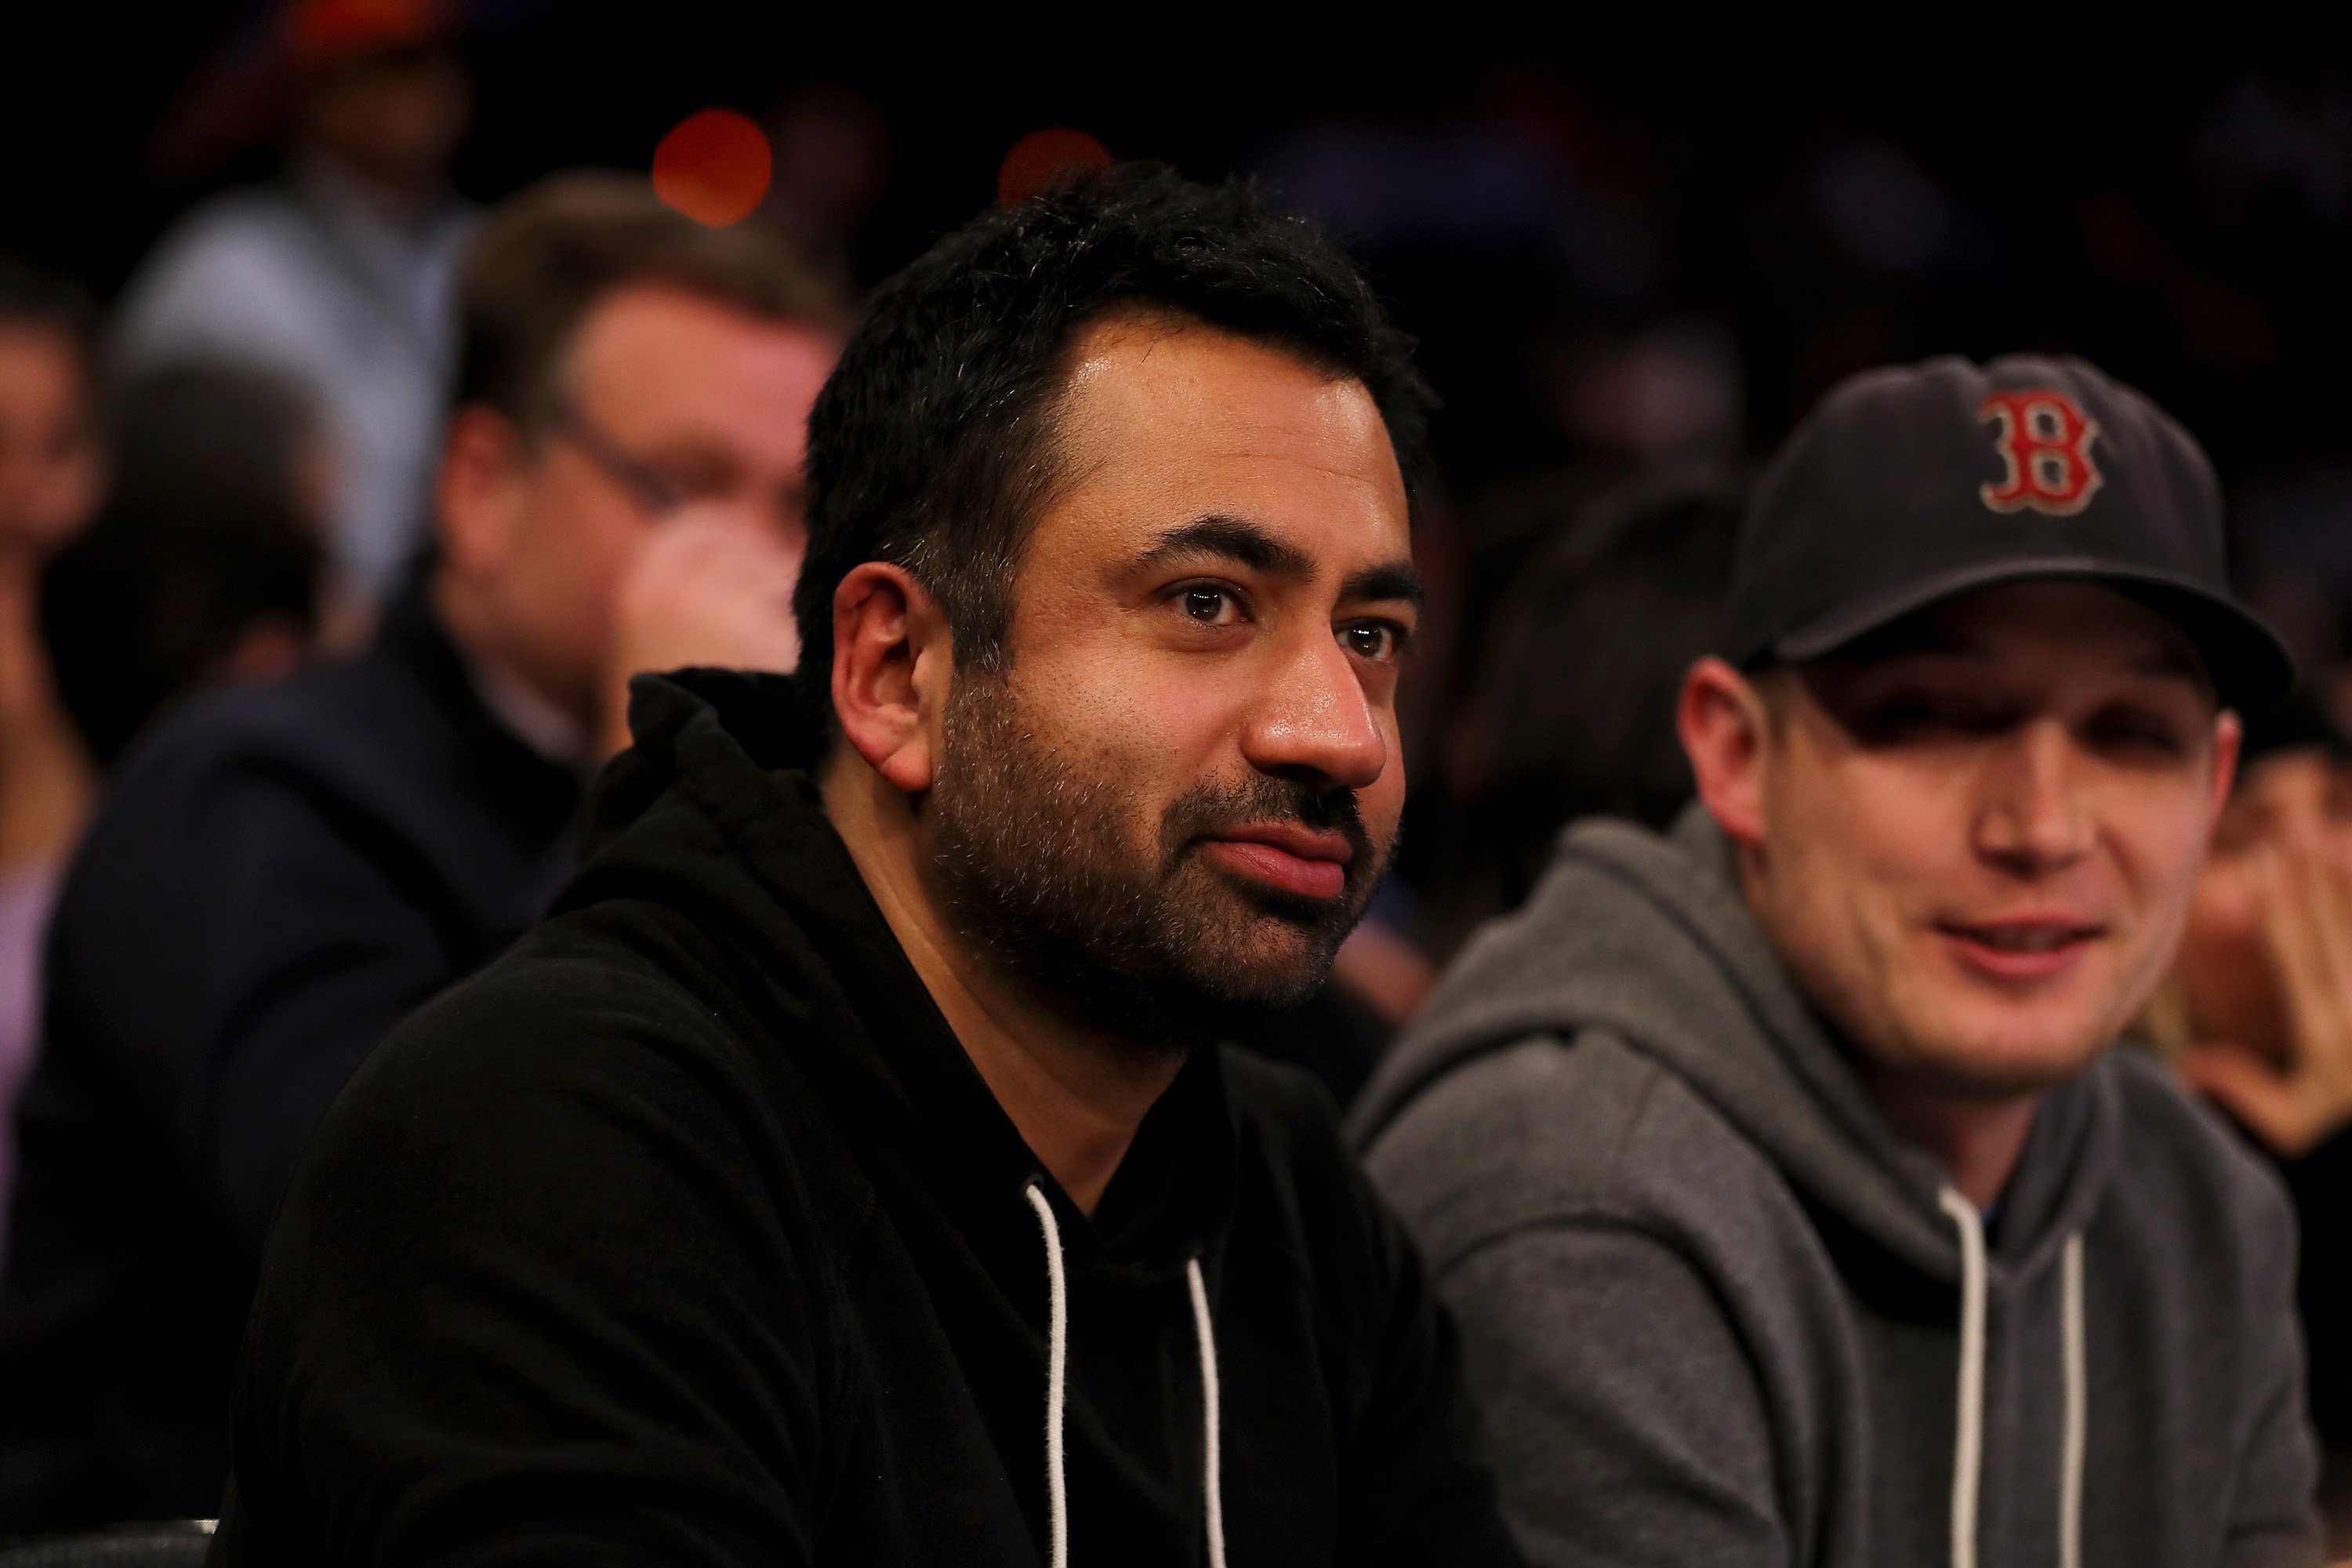 Kal Penn and his rumored fiancé are watching the New York Knicks and the Los Angeles Clippers basketball game on November 20, 2017, in New York City. | Source: Getty Images